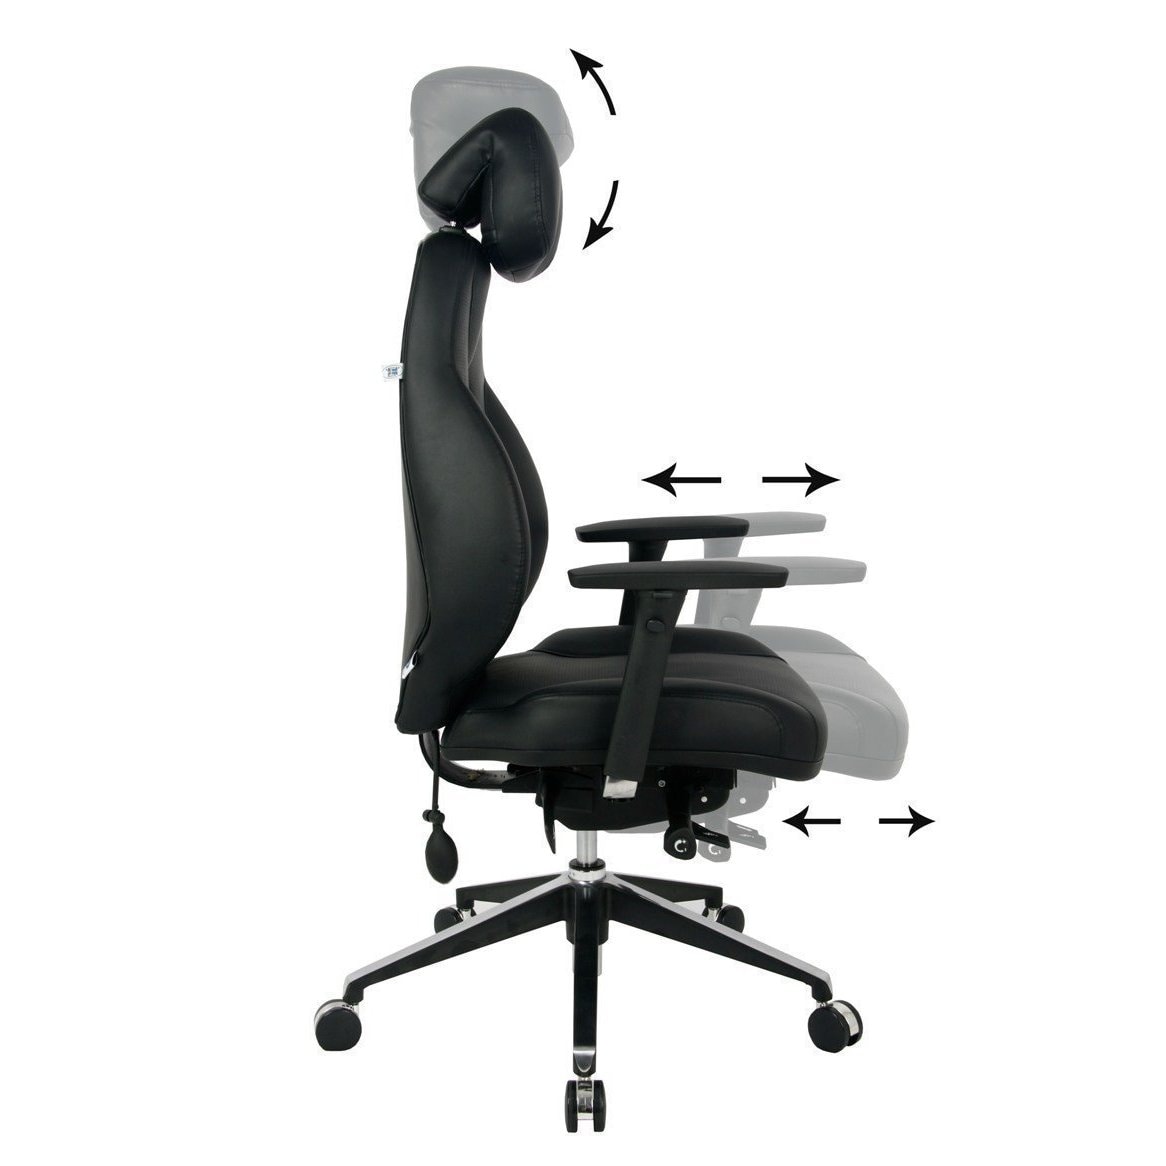 https://ak1.ostkcdn.com/images/products/14535179/VIVA-OFFICE-Hottest-High-Back-Ergonomic-Multi-function-Luxury-Leather-Office-Chair-79dd73c6-8021-4bb5-9e27-aaa1ef81bdb9.jpg